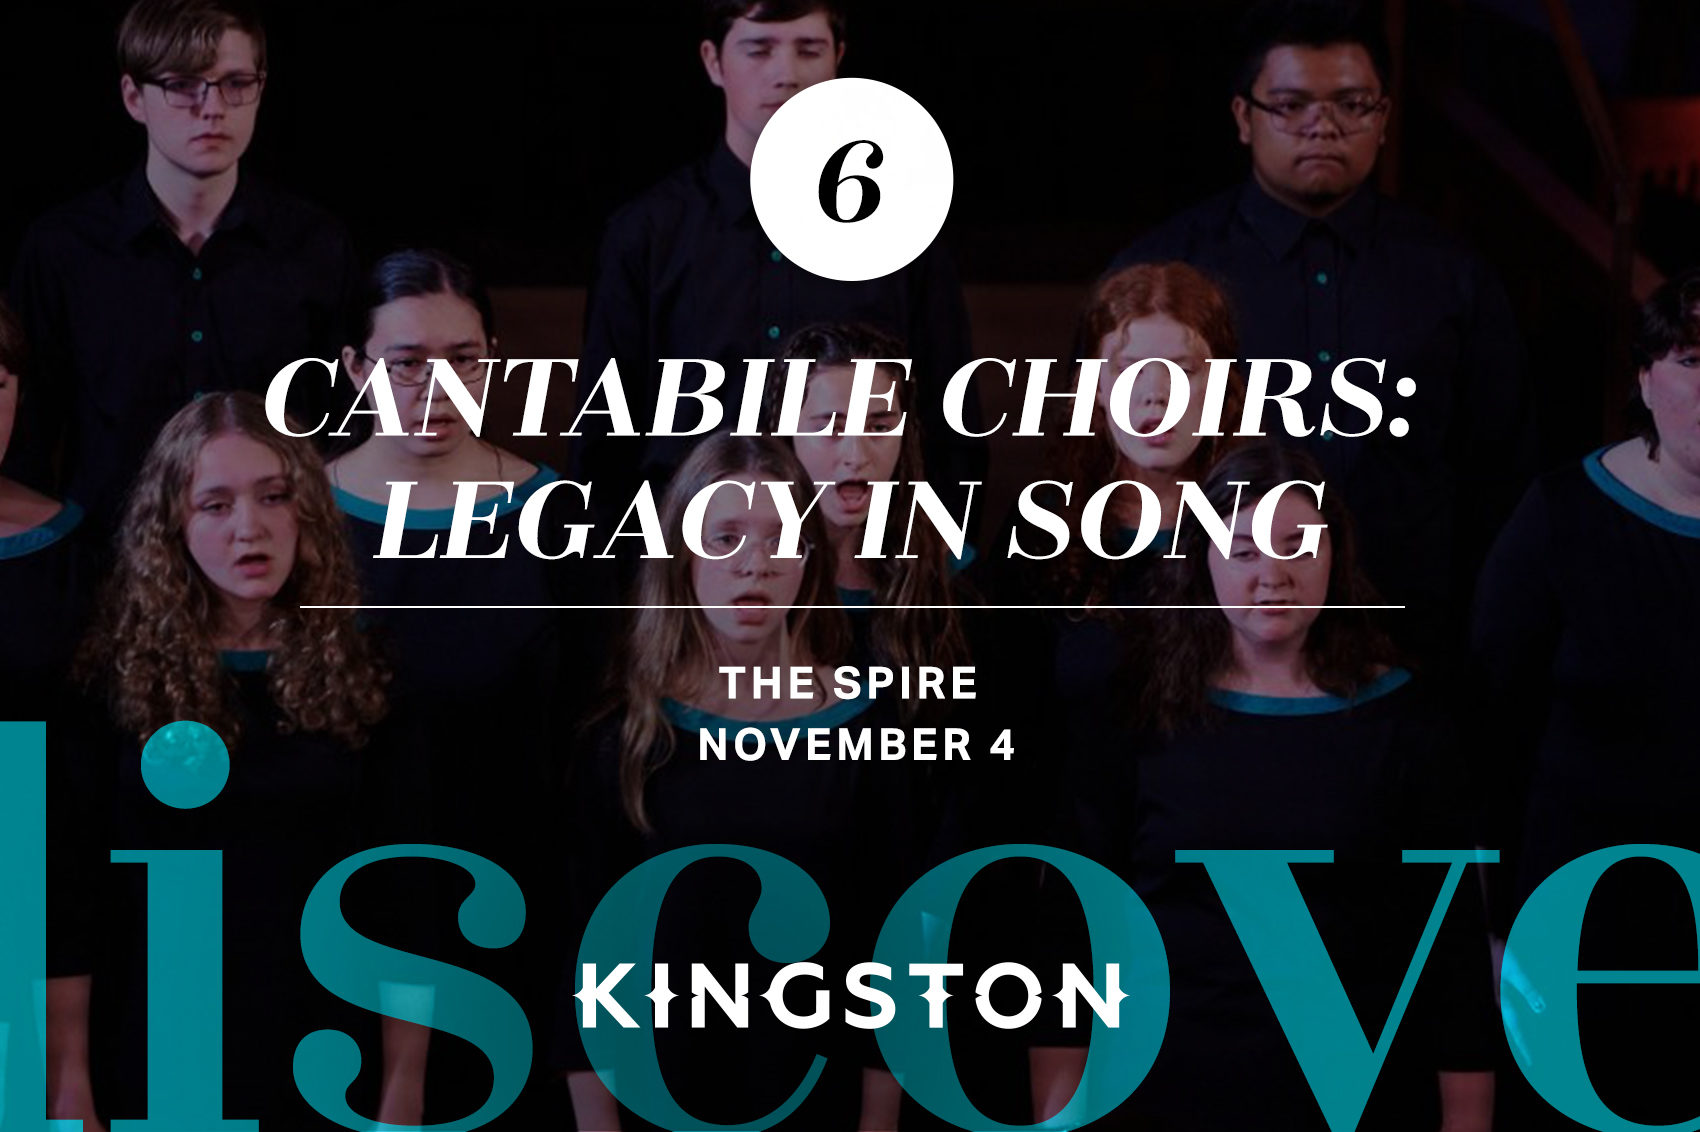 Cantabile Choirs: Legacy in song